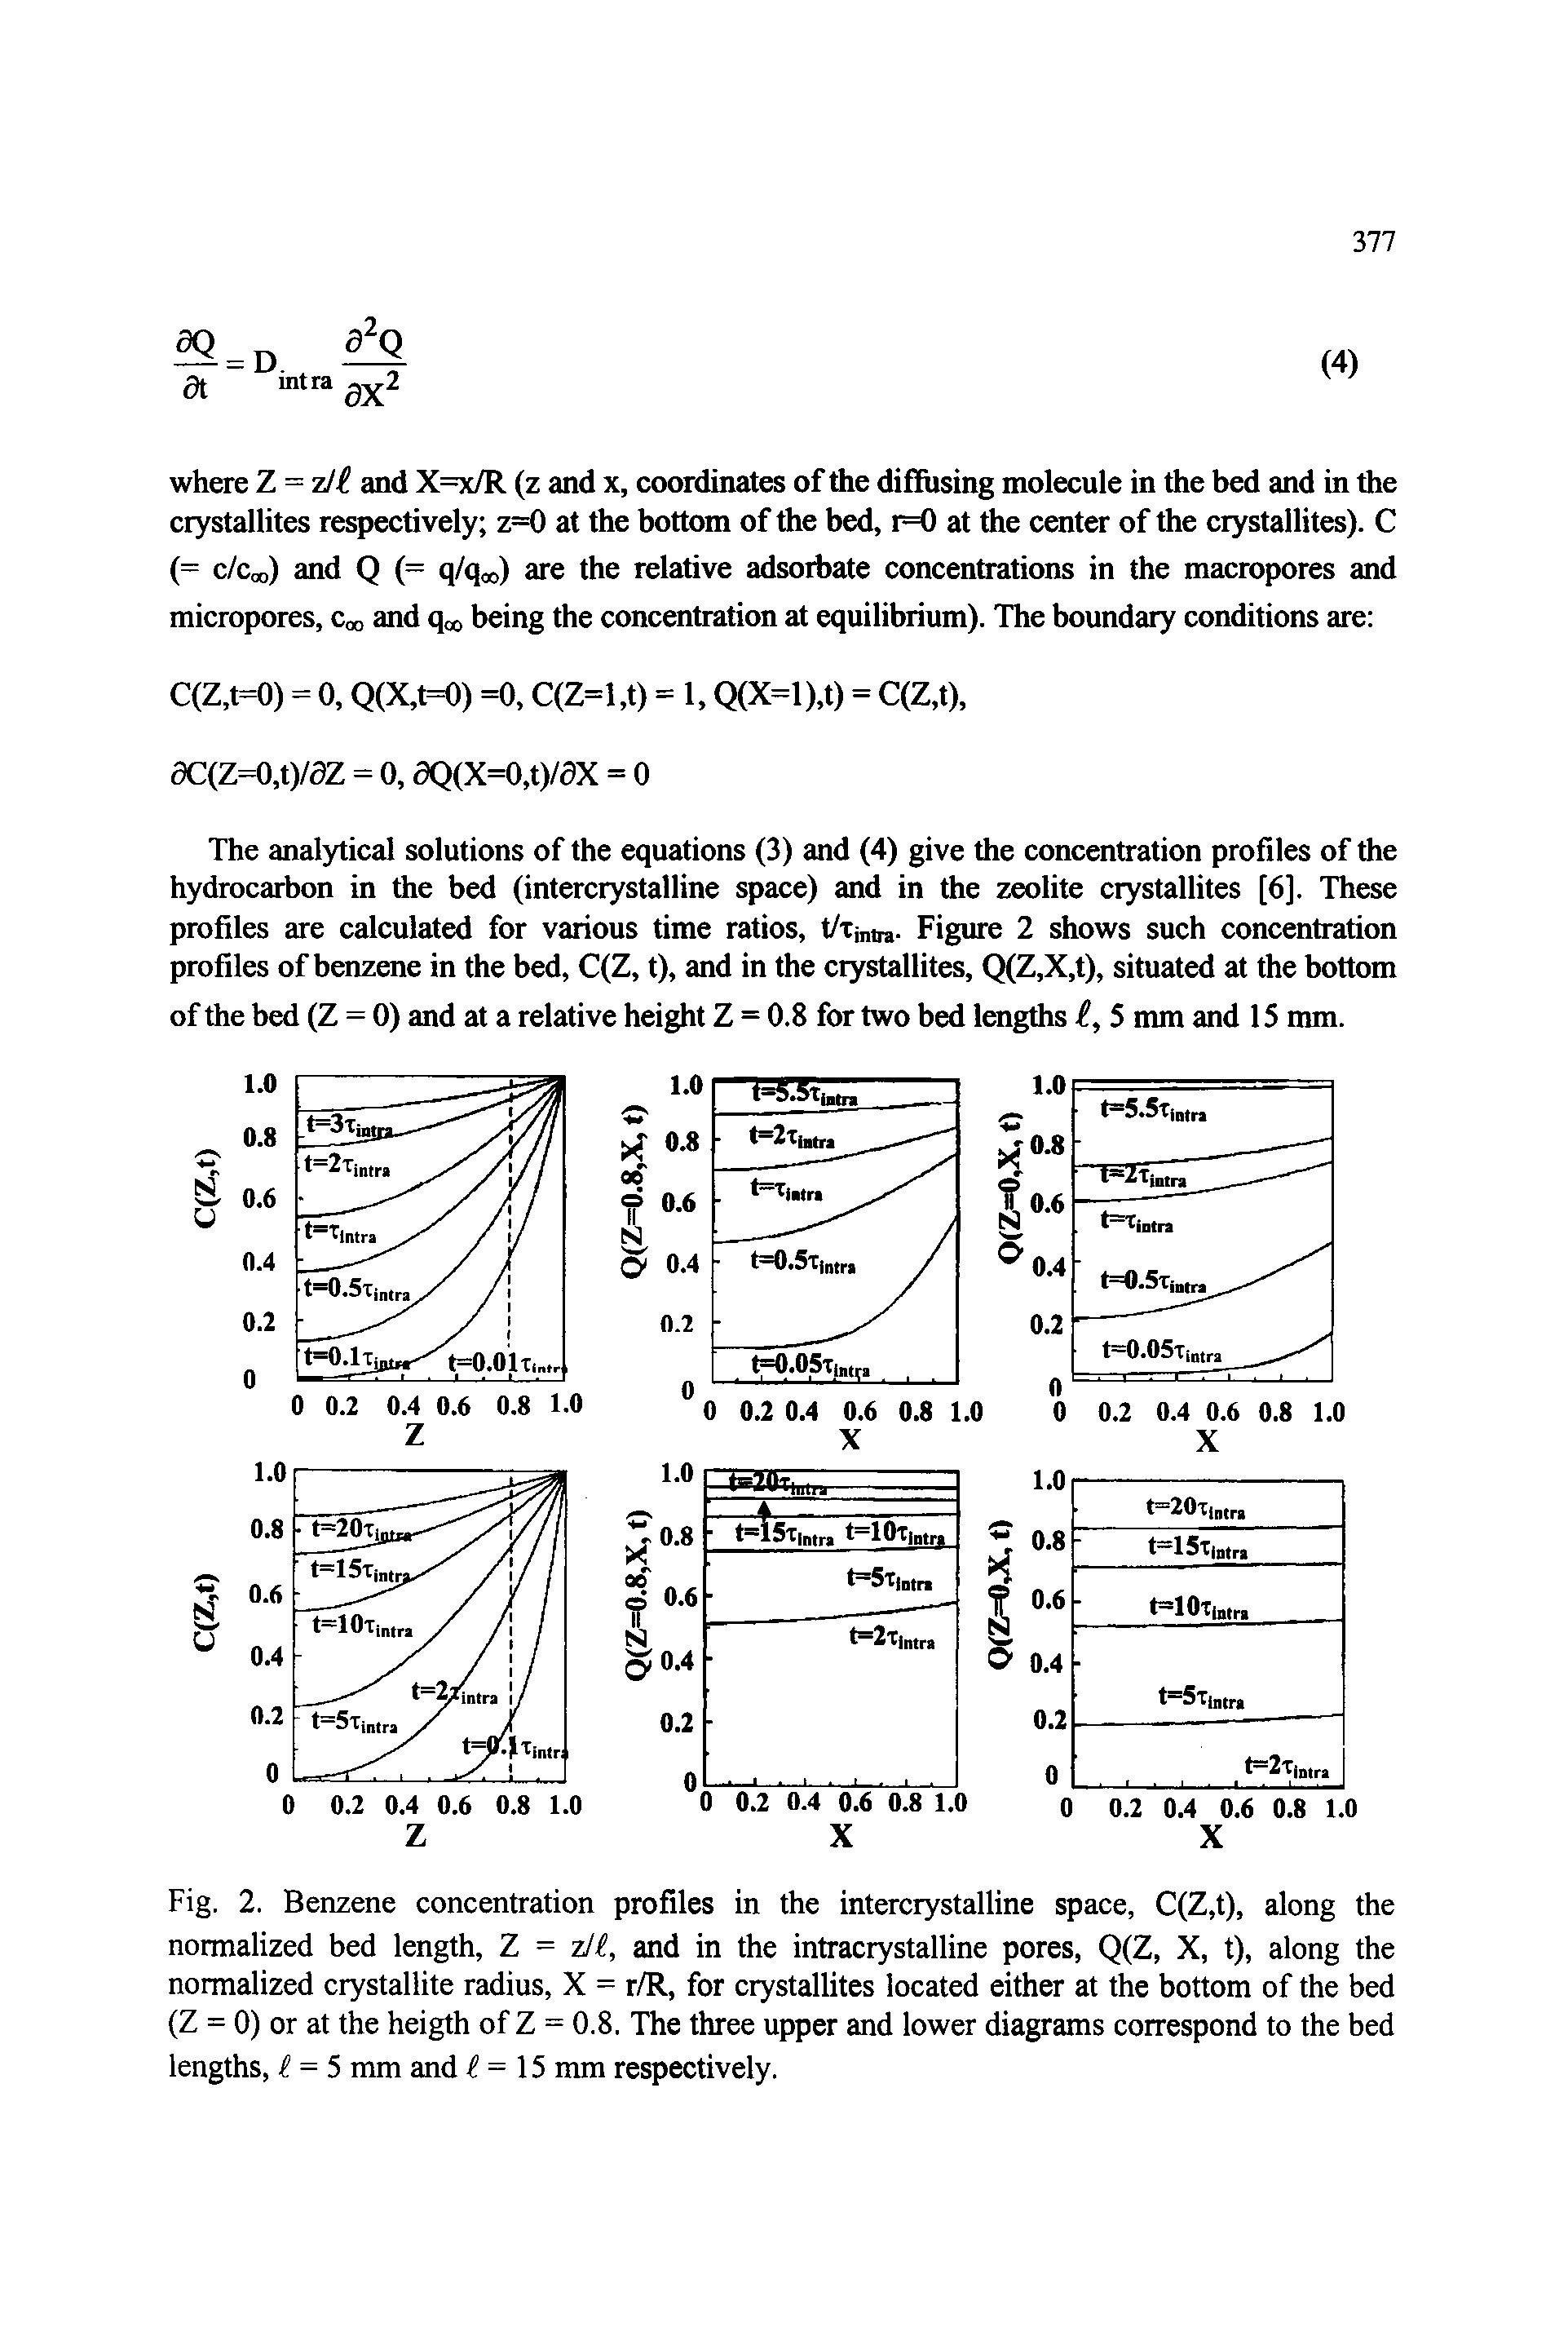 Fig. 2. Benzene concentration profiles in the intercrystalline space, C(Z,t), along the normalized bed length, Z = z/i, and in the intracrystalline pores, Q(Z, X, t), along the normalized crystallite radius, X = r/R, for crystallites located either at the bottom of the bed (Z = 0) or at the heigth of Z = 0.8. The three upper and lower diagrams correspond to the bed lengths, i = 5 mm and f = 15 mm respectively.